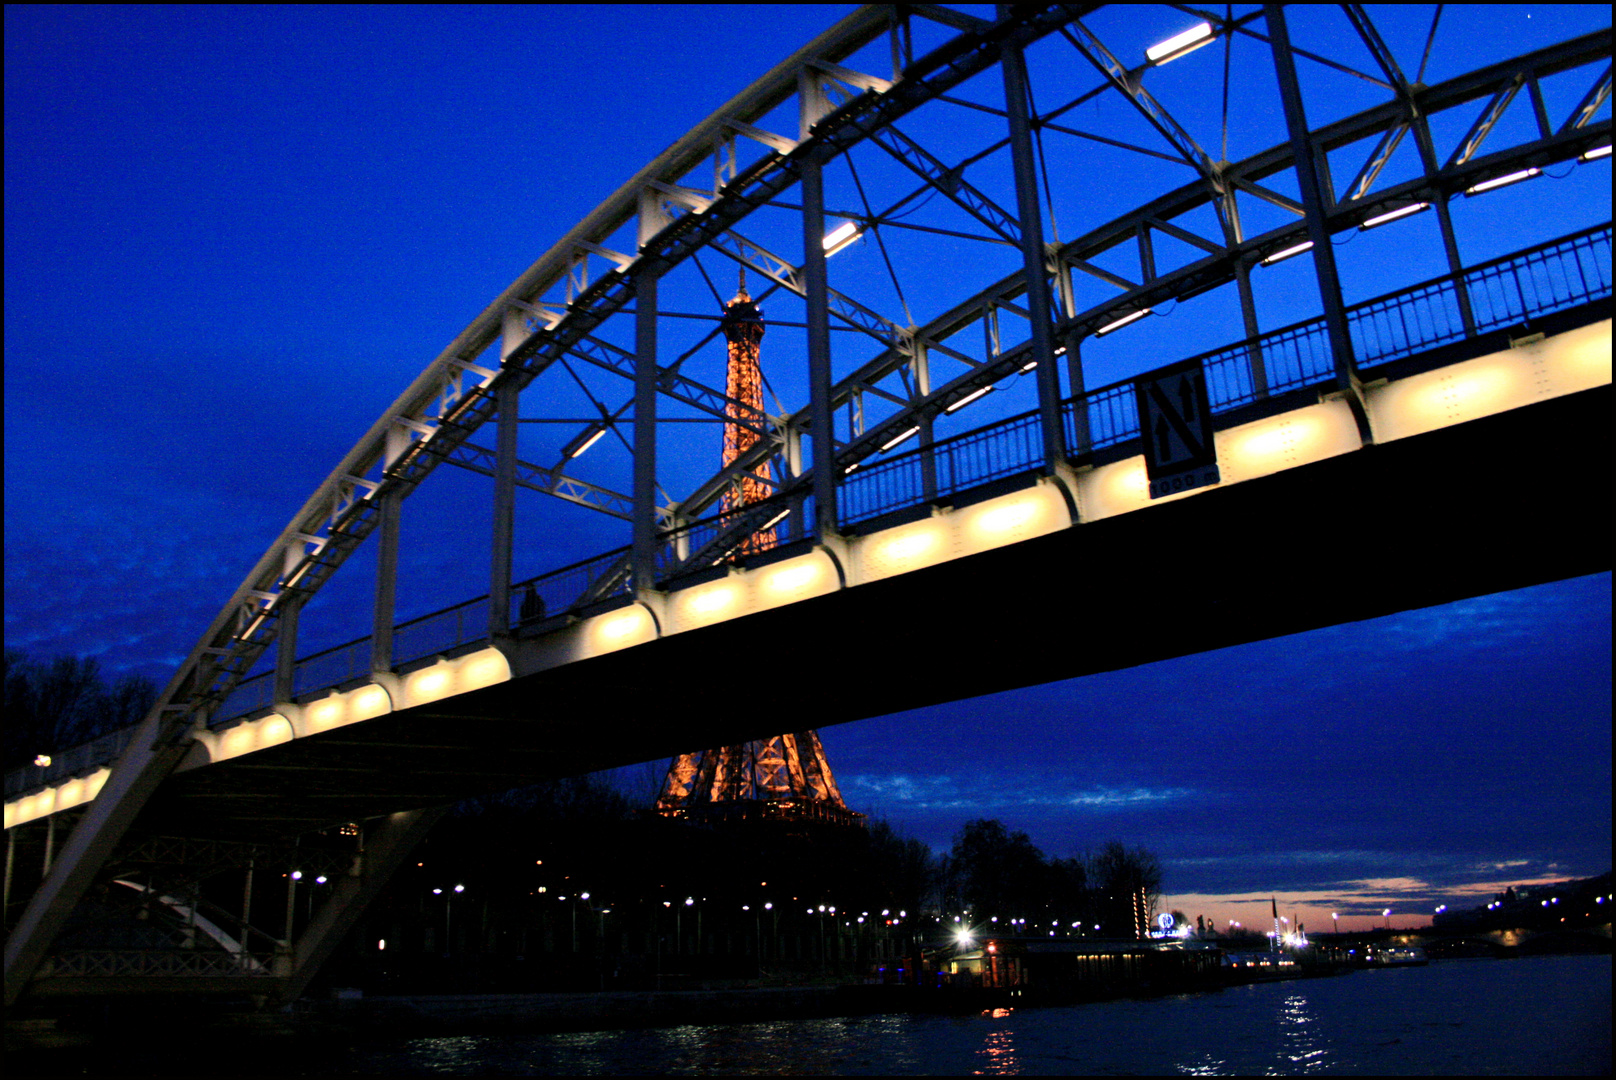 Eiffel tower and bridge from the Seine